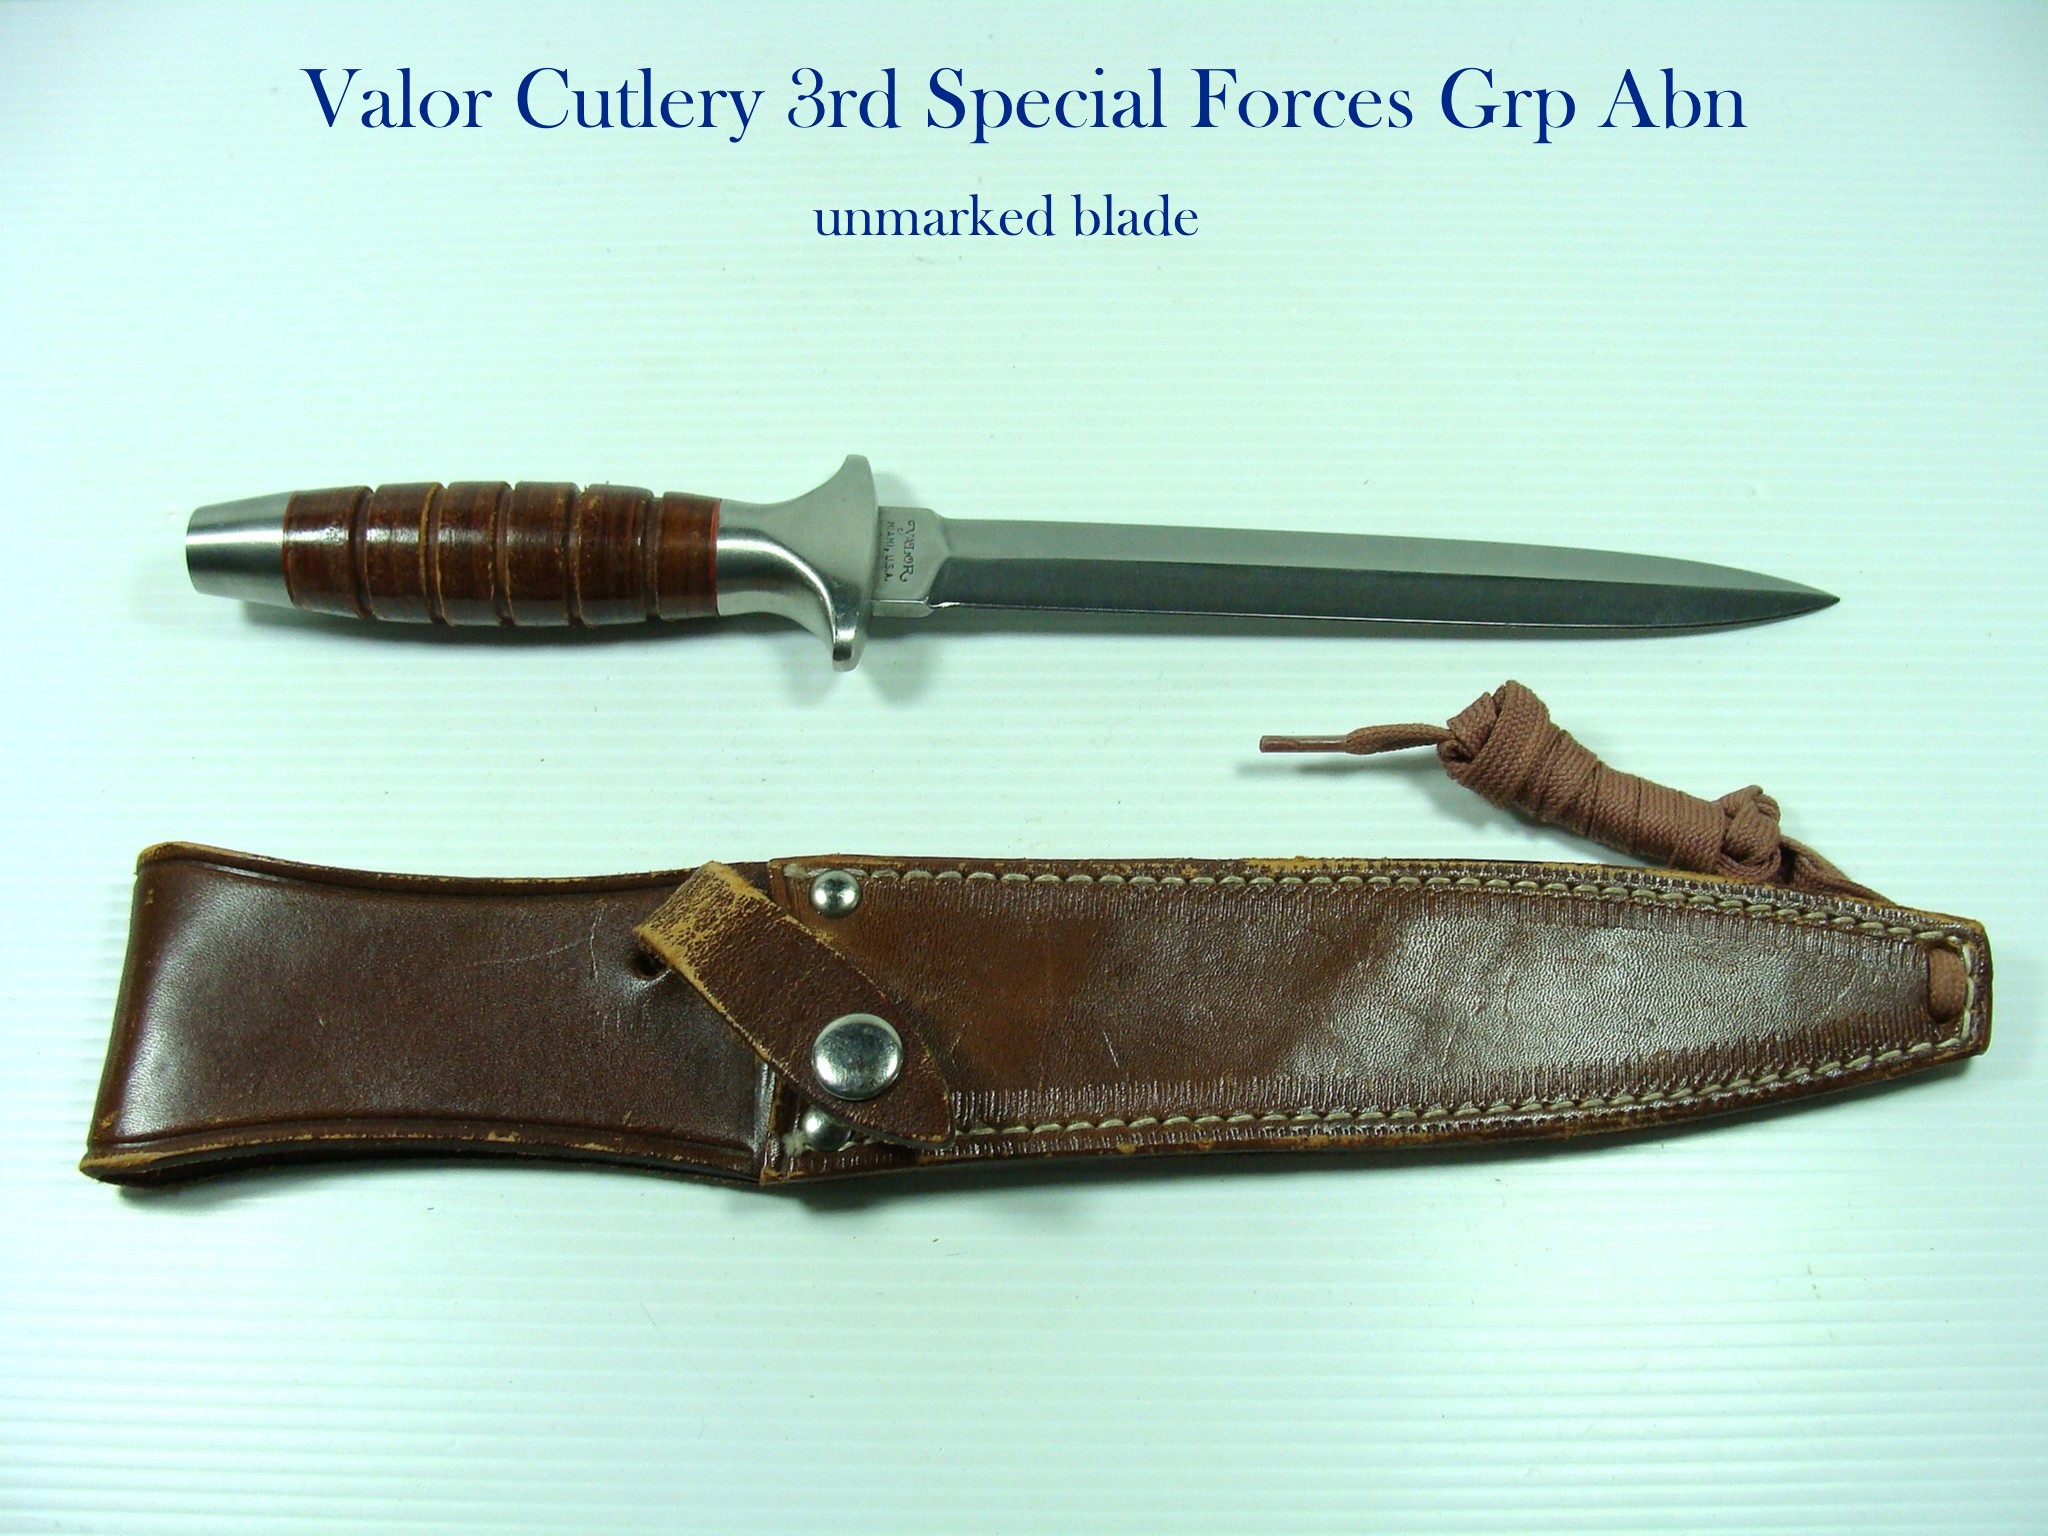 Valor Cutlery 3rd Special Forces Grp Abn 1.jpg